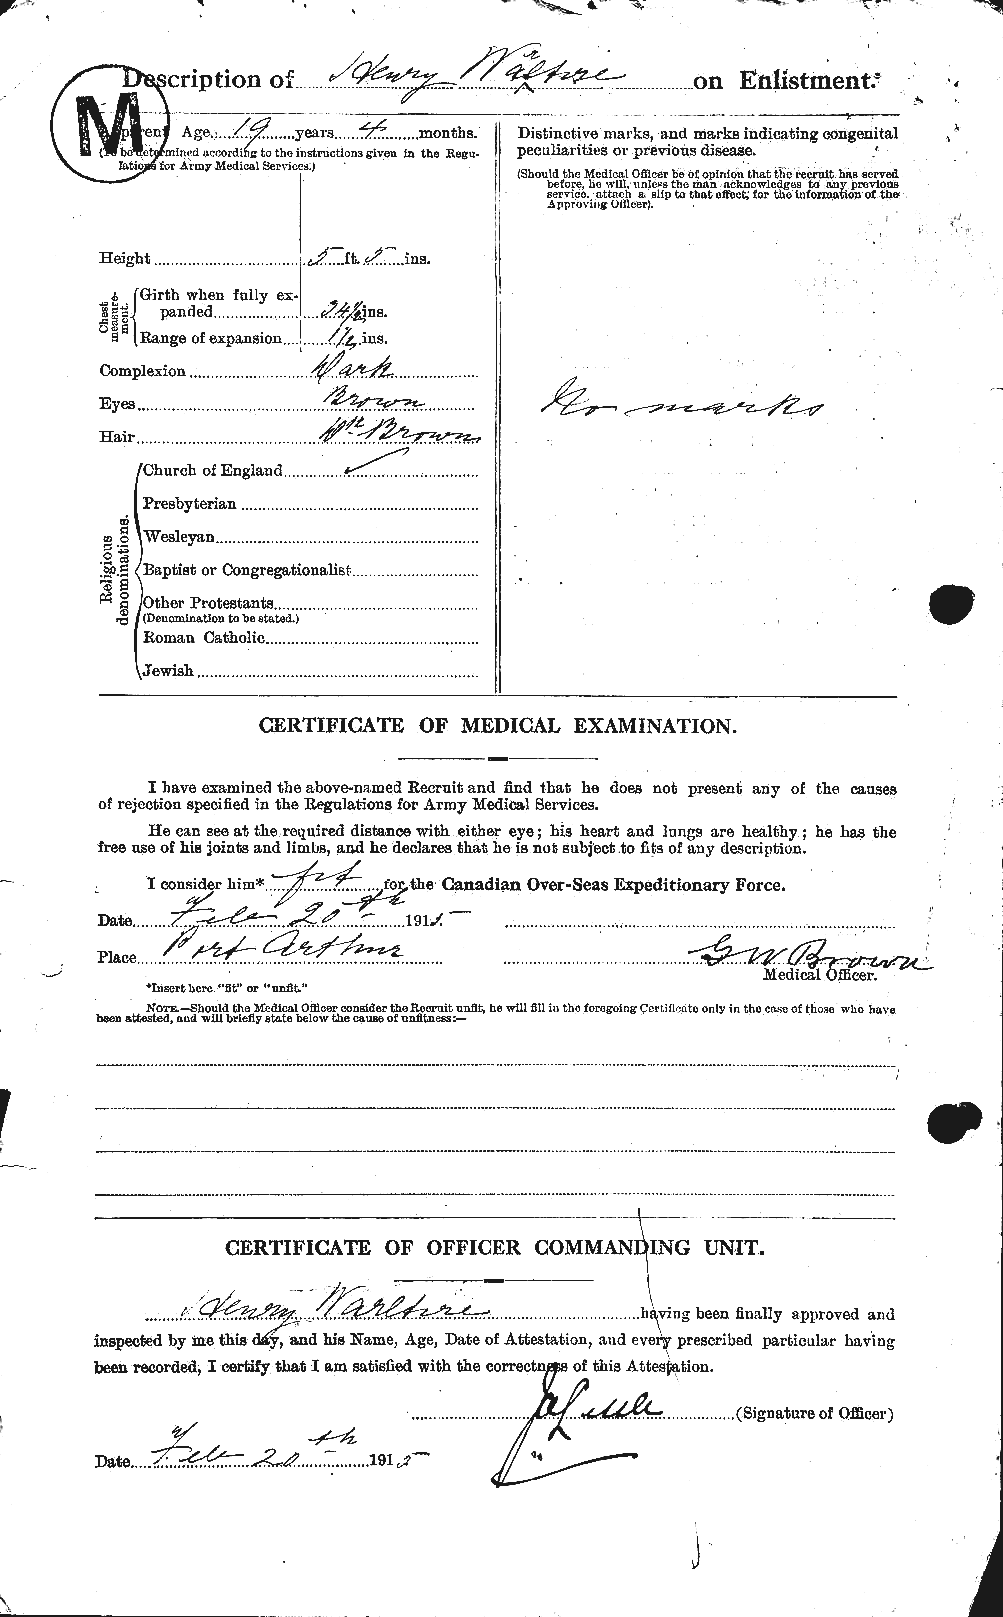 Personnel Records of the First World War - CEF 657210b